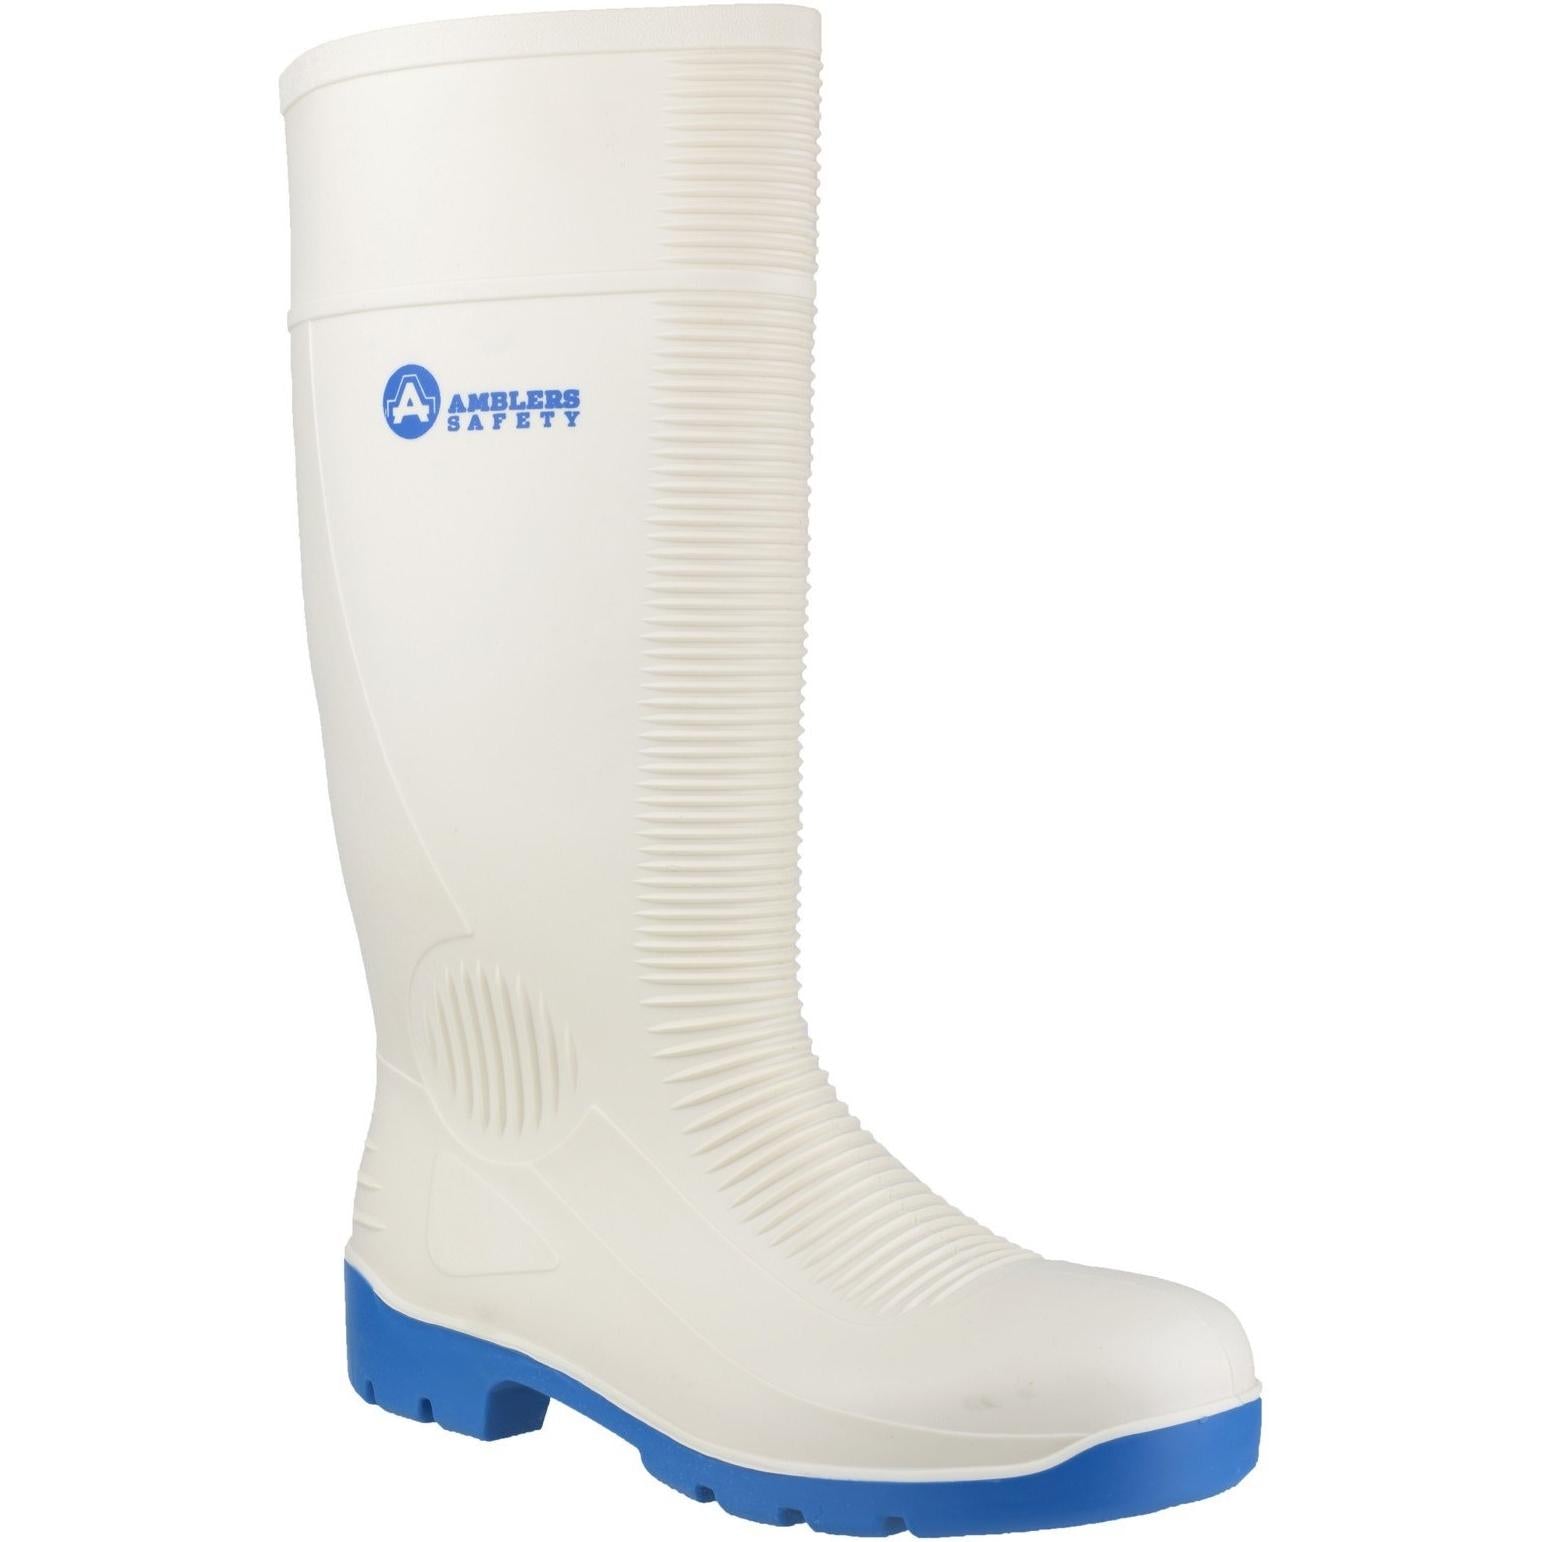 Amblers Safety FS98 Steel Toe Food Safety Wellington Boots